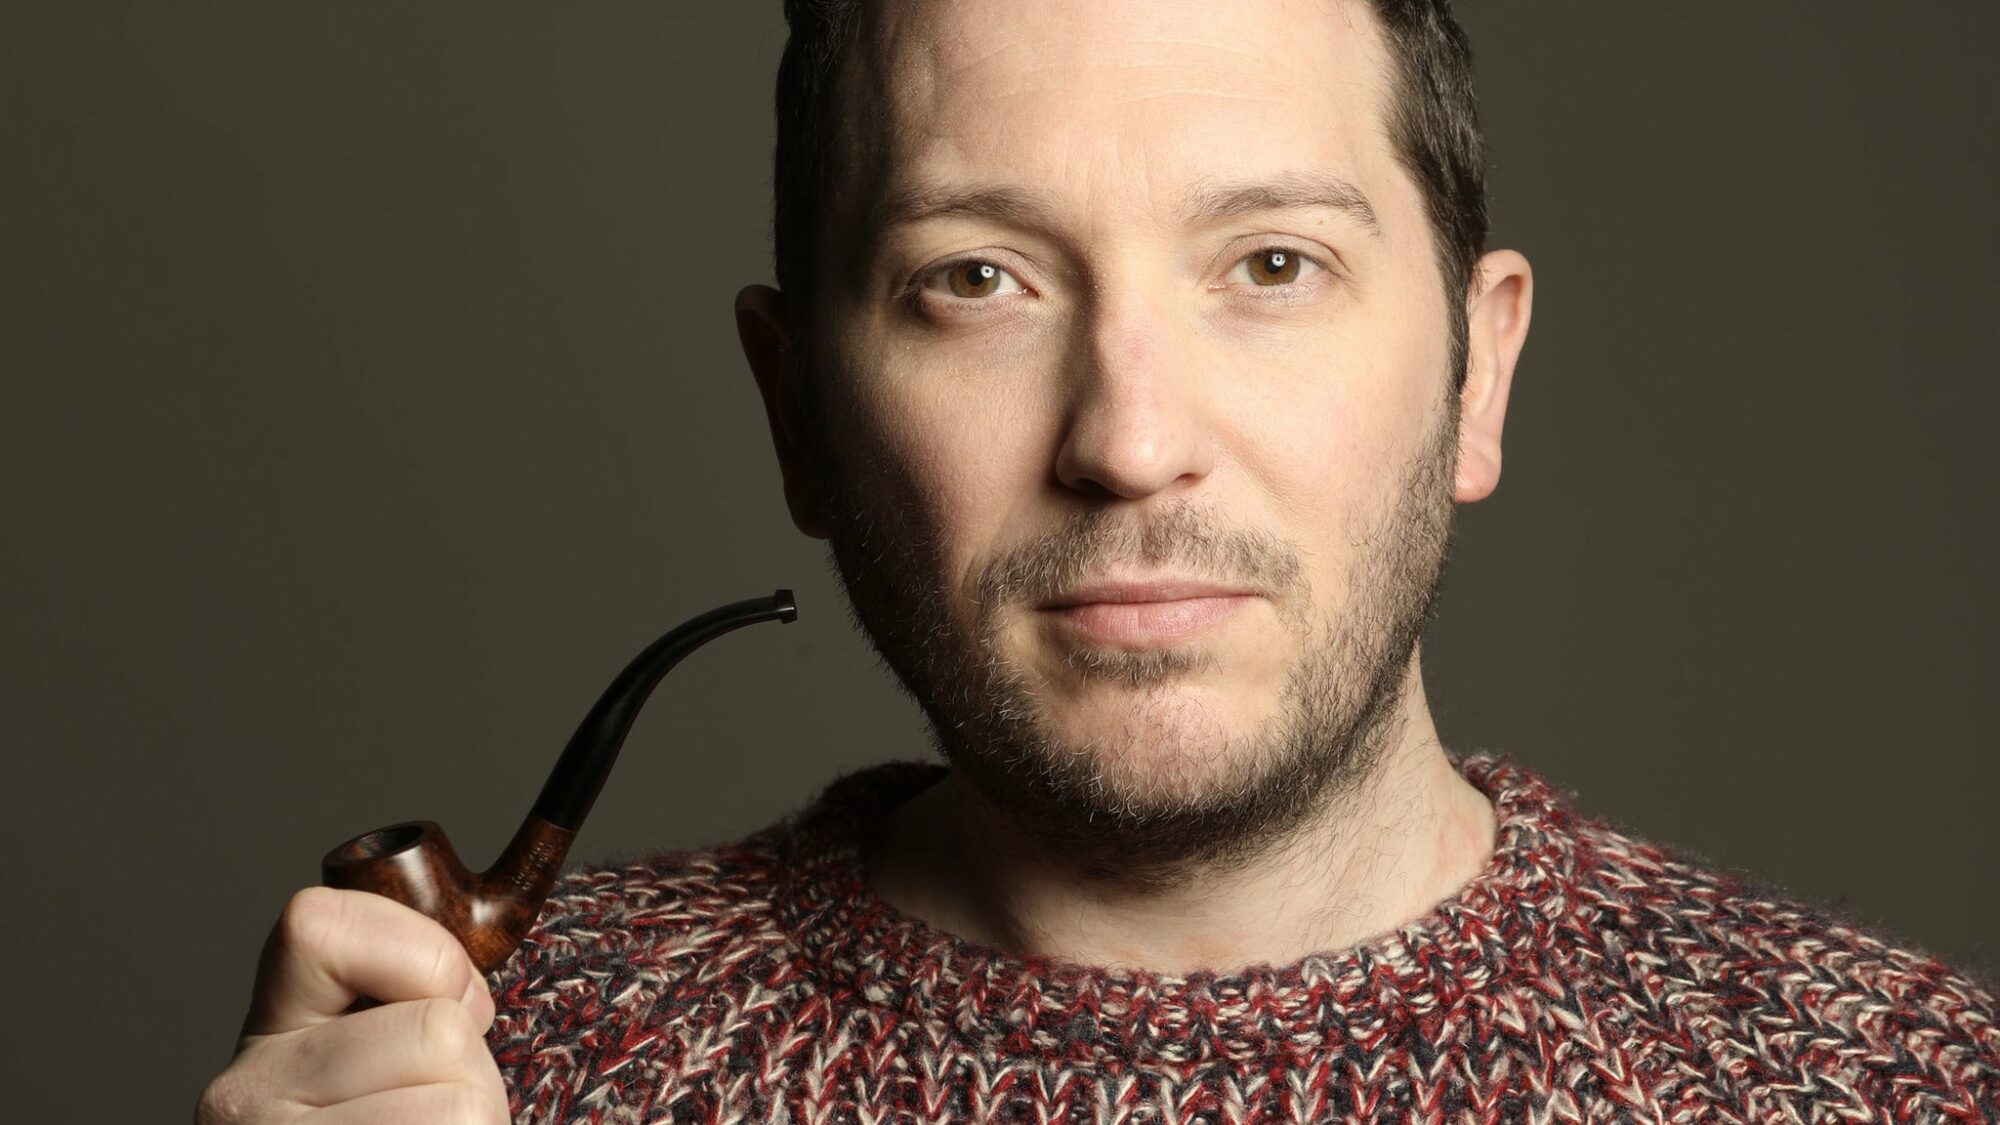 Image name Jon Richardson The Knitwit at Leeds Grand Theatre Leeds the 10 image from the post Jon Richardson: The Knitwit at St Georges Hall, Bradford, Bradford in Yorkshire.com.